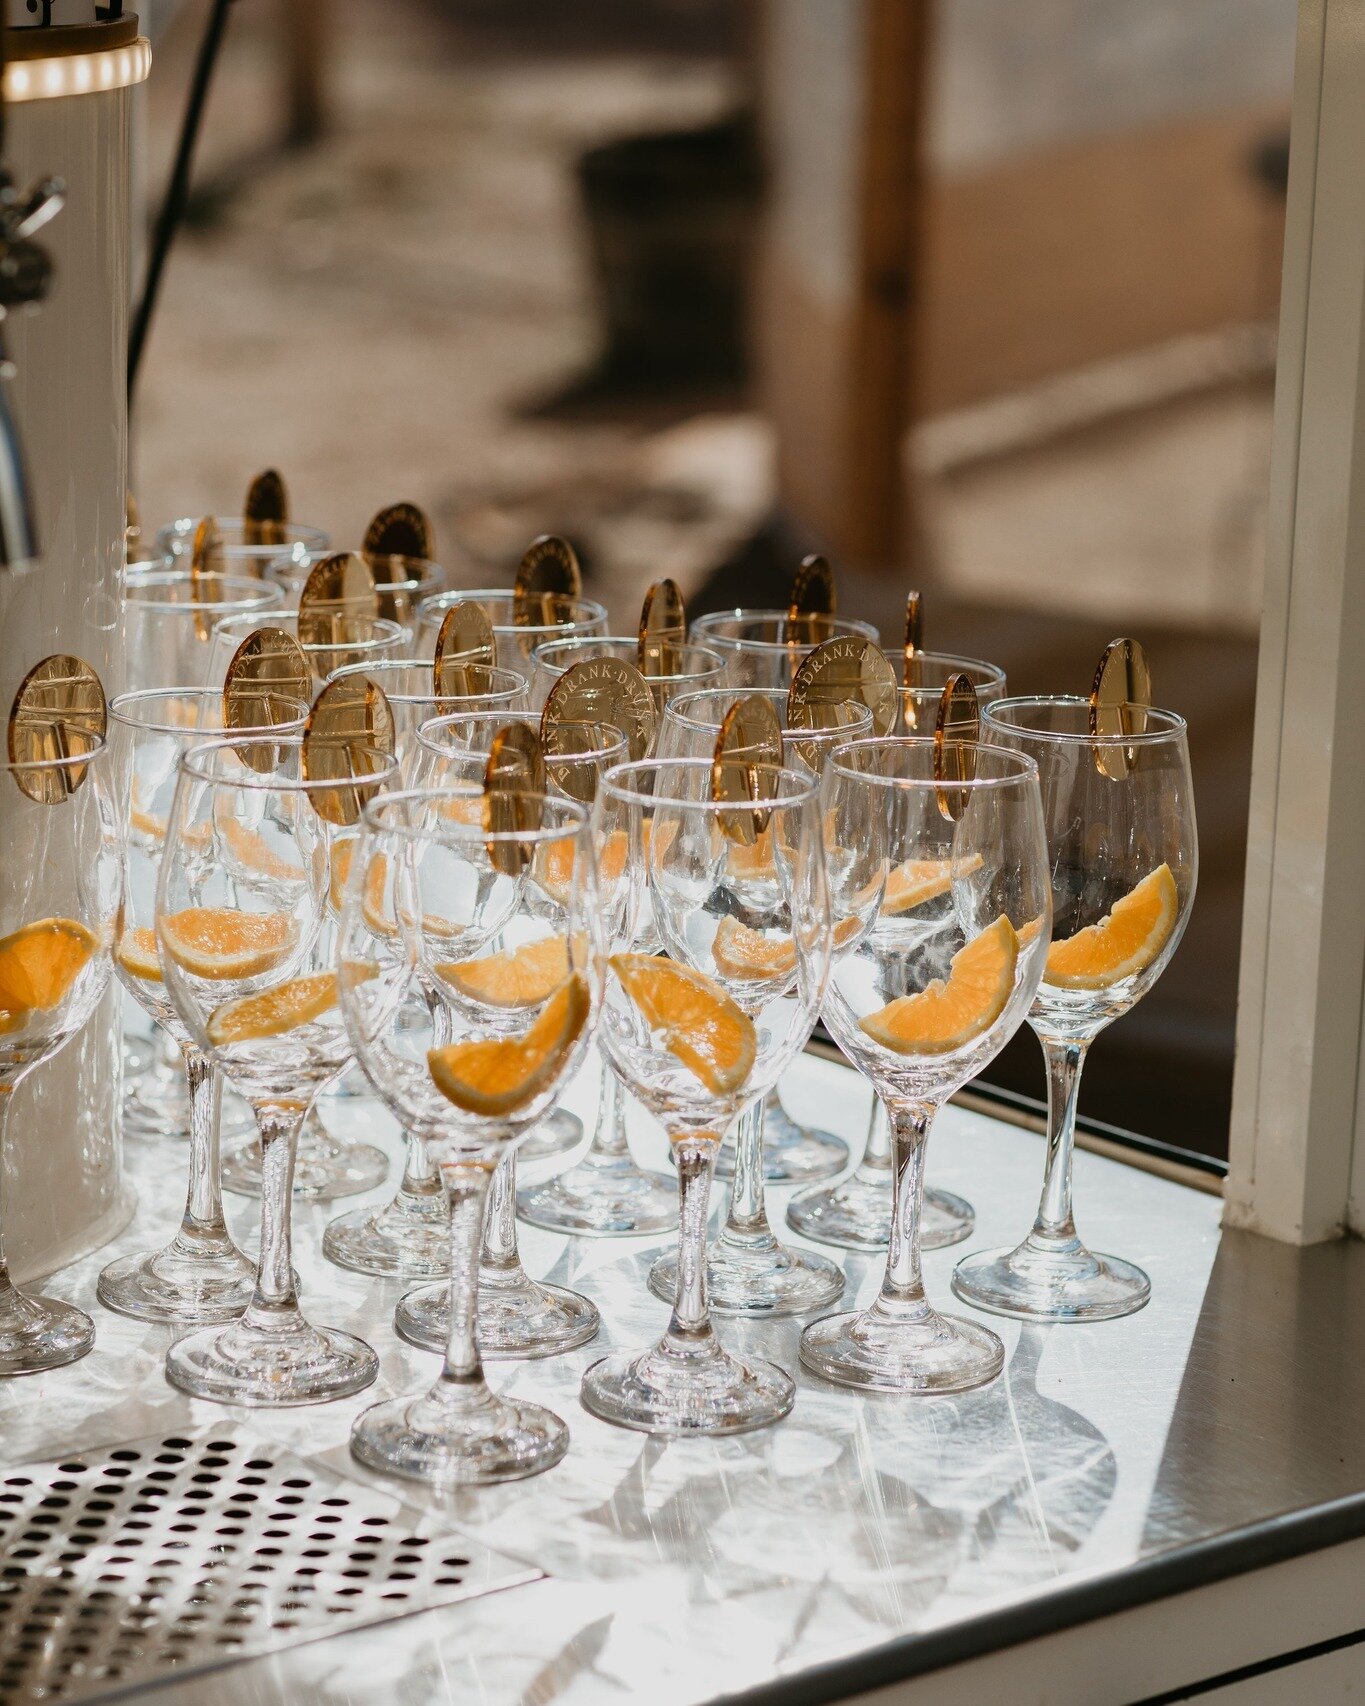 We're lining up the glasses and getting ready to serve you a whole range of delicious cocktails with @sip.casa this Saturday at BeerFest! 🥂🍹🍸

If you already have tickets, you're in for a treat! Stop by our Cocktail Bar, located in the main stage 